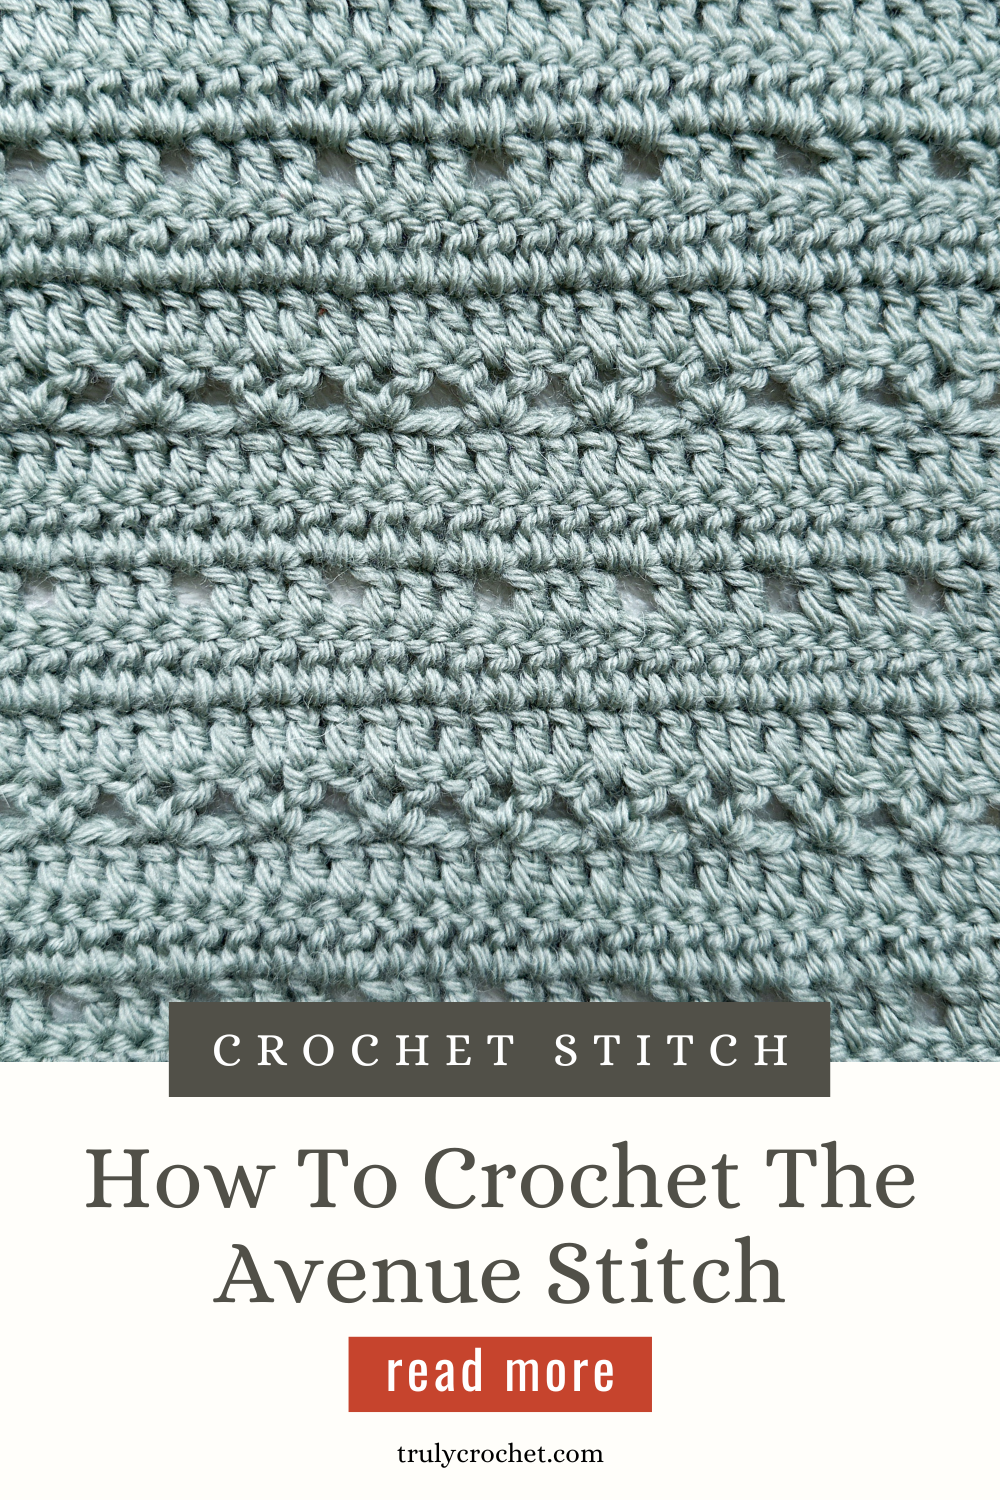 how To Crochet the Avenue Stitch